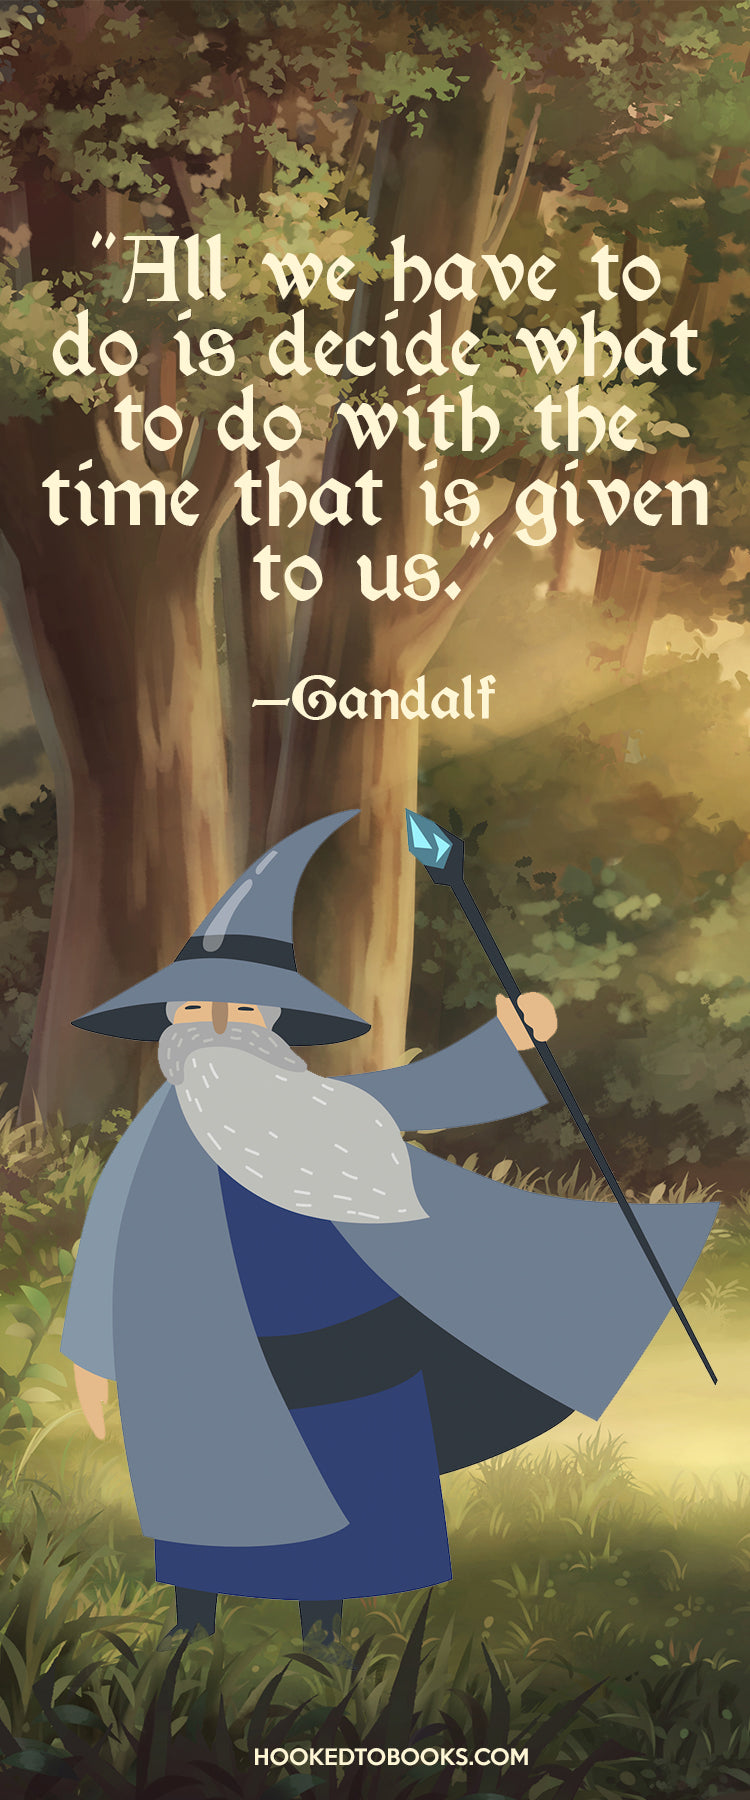 Lord of the Rings Digital Download Printable Bookmarks – HookedtoBooks